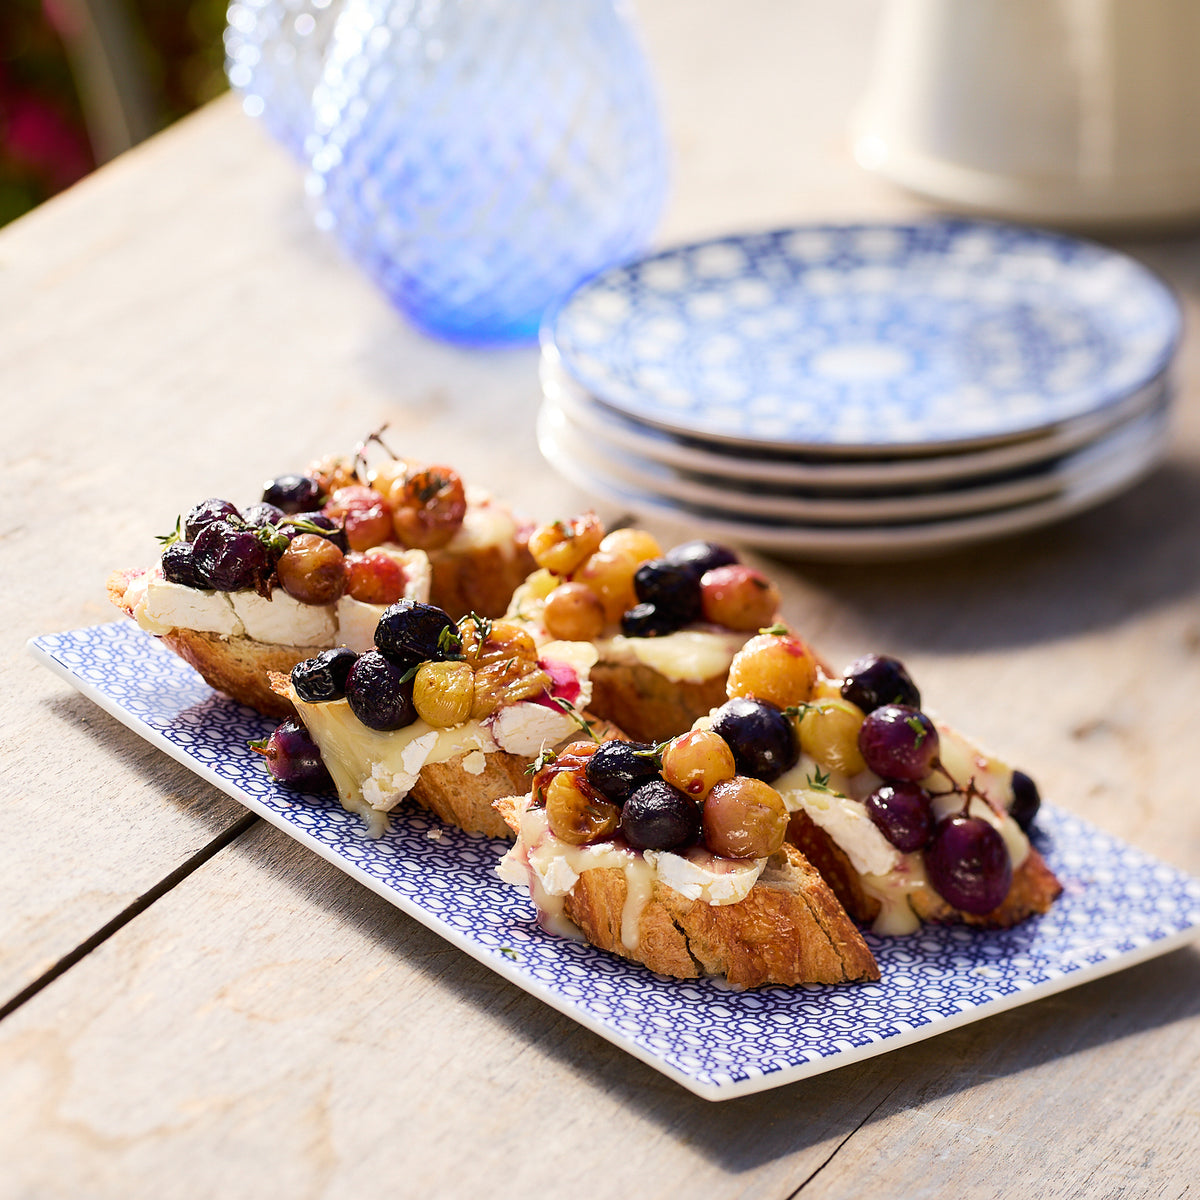 Slices of toasted bread topped with various berries and cream cheese are arranged on a Caskata Newport Large Sushi Tray, set on a wooden table next to a stack of premium porcelain plates and a blue glass jug.